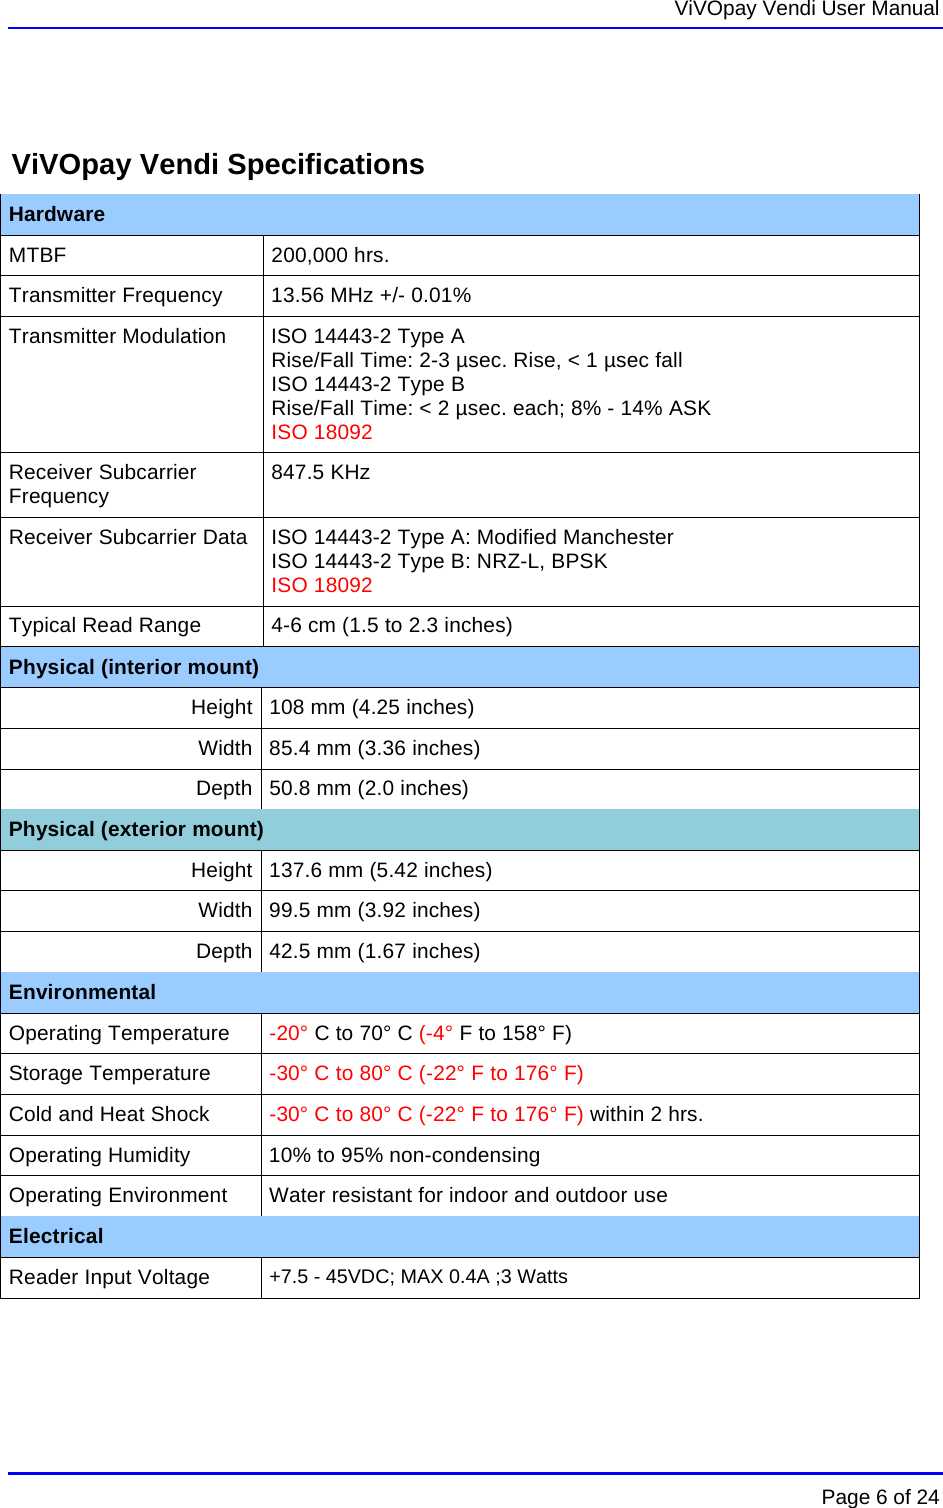   ViVOpay Vendi User Manual        Page 6 of 24     ViVOpay Vendi Specifications Hardware MTBF 200,000 hrs. Transmitter Frequency  13.56 MHz +/- 0.01% Transmitter Modulation  ISO 14443-2 Type A Rise/Fall Time: 2-3 µsec. Rise, &lt; 1 µsec fall ISO 14443-2 Type B Rise/Fall Time: &lt; 2 µsec. each; 8% - 14% ASK ISO 18092 Receiver Subcarrier Frequency  847.5 KHz Receiver Subcarrier Data  ISO 14443-2 Type A: Modified Manchester ISO 14443-2 Type B: NRZ-L, BPSK ISO 18092 Typical Read Range  4-6 cm (1.5 to 2.3 inches) Physical (interior mount) Height  108 mm (4.25 inches) Width  85.4 mm (3.36 inches) Depth  50.8 mm (2.0 inches) Physical (exterior mount) Height  137.6 mm (5.42 inches) Width  99.5 mm (3.92 inches) Depth  42.5 mm (1.67 inches) Environmental Operating Temperature  -20° C to 70° C (-4° F to 158° F) Storage Temperature  -30° C to 80° C (-22° F to 176° F) Cold and Heat Shock  -30° C to 80° C (-22° F to 176° F) within 2 hrs. Operating Humidity  10% to 95% non-condensing Operating Environment  Water resistant for indoor and outdoor use Electrical Reader Input Voltage   +7.5 - 45VDC; MAX 0.4A ;3 Watts  